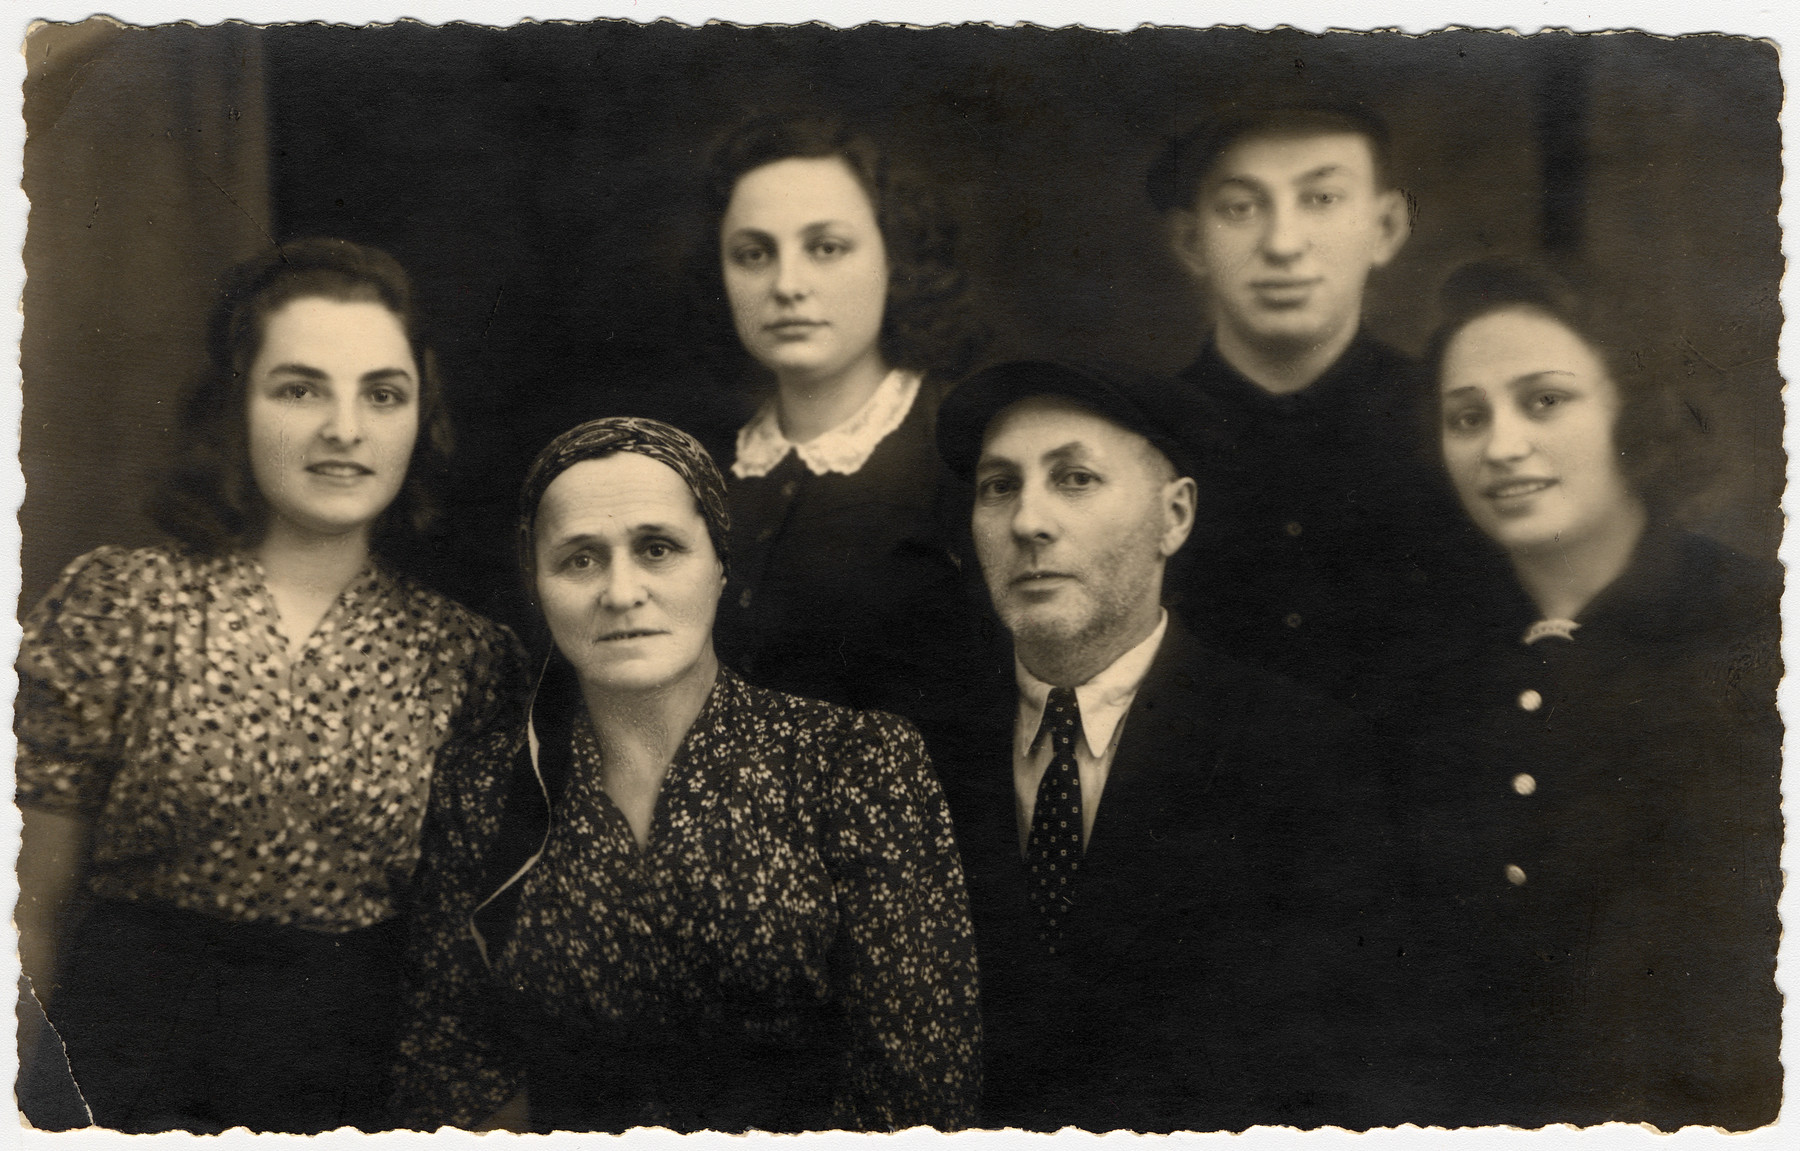 Postwar portrait of the Ass family who survived the war with the Bielski partisans.

From left to right are Chana Chamanovitch (their adoptive daughter), Beila, Itka, Yaakov Menachem, Yosef and Esther Ass.